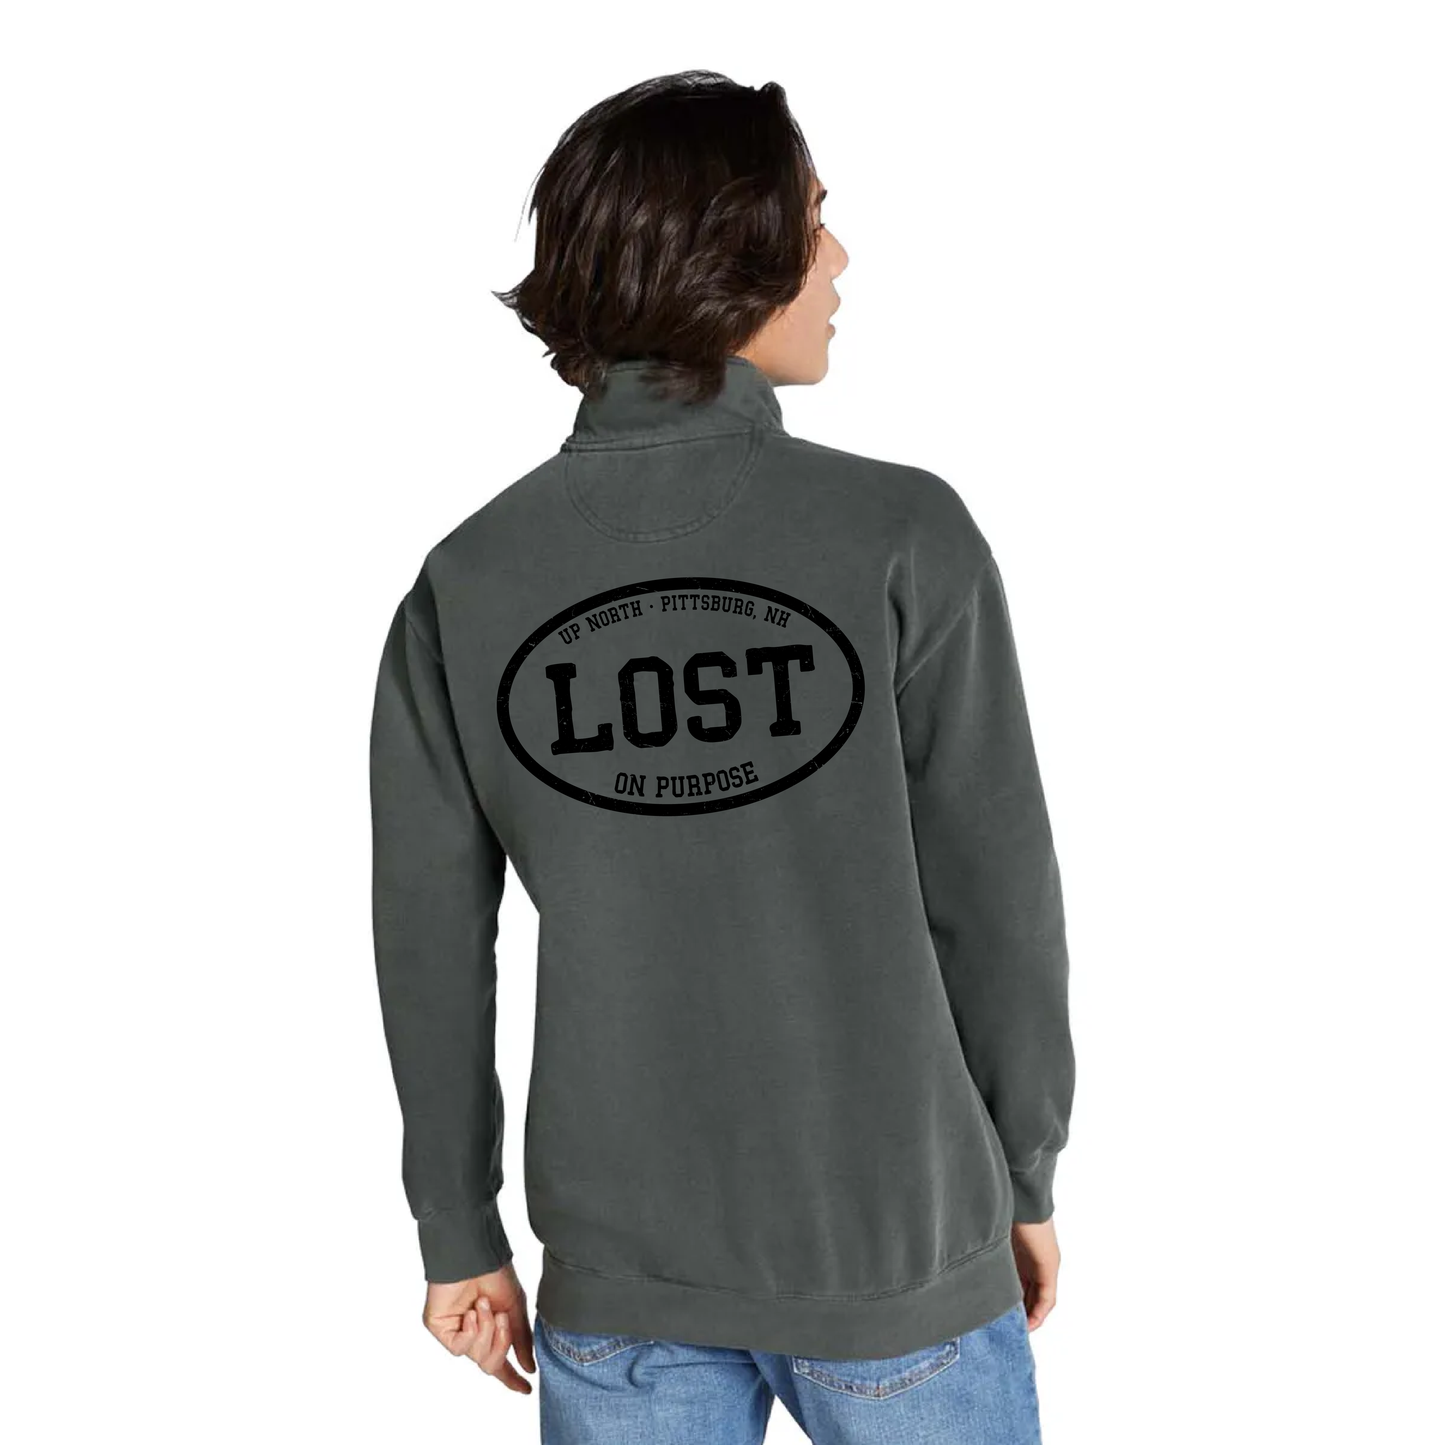 Lost on Purpose - Garment-Dyed Quarter Zip - Charcoal